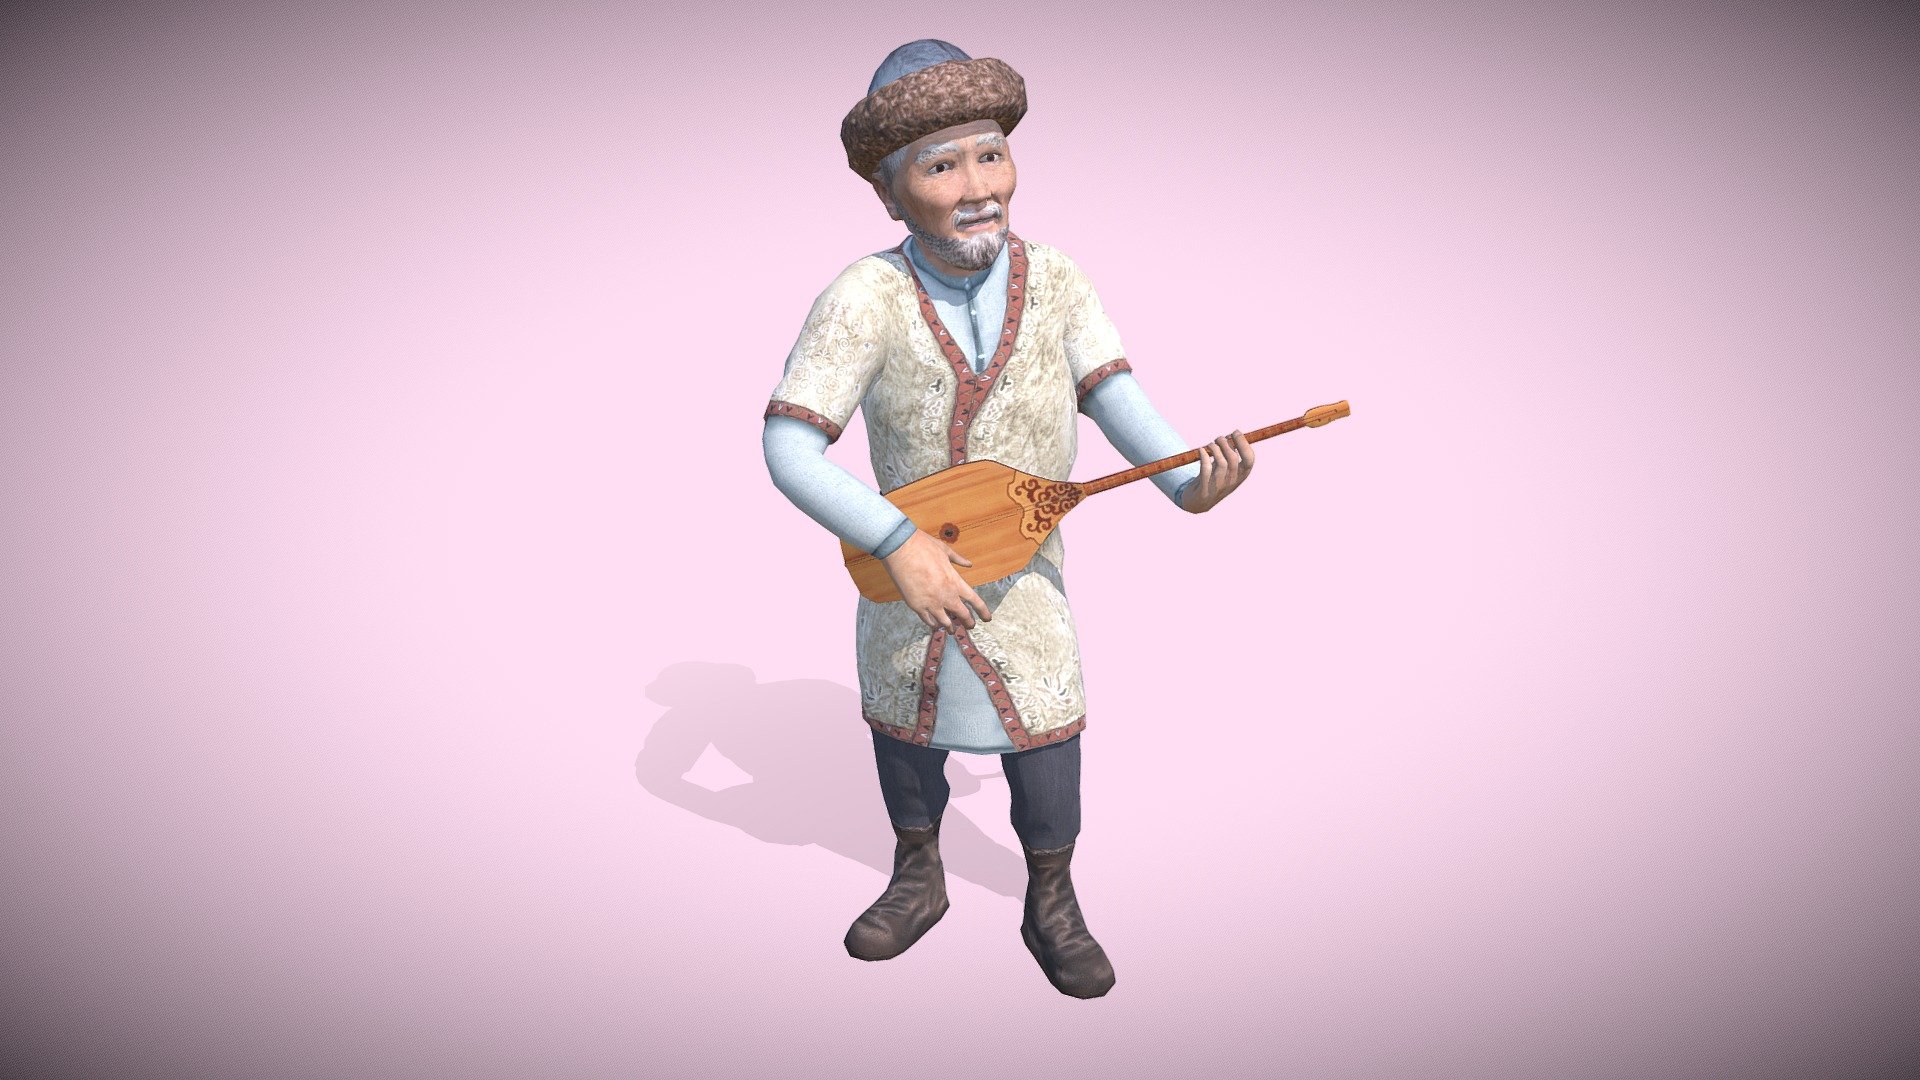 Musician Character Animated - Low Poly

Optimized for games (game ready), Suitable for close-UPS, illustrations and various renderings 3d model